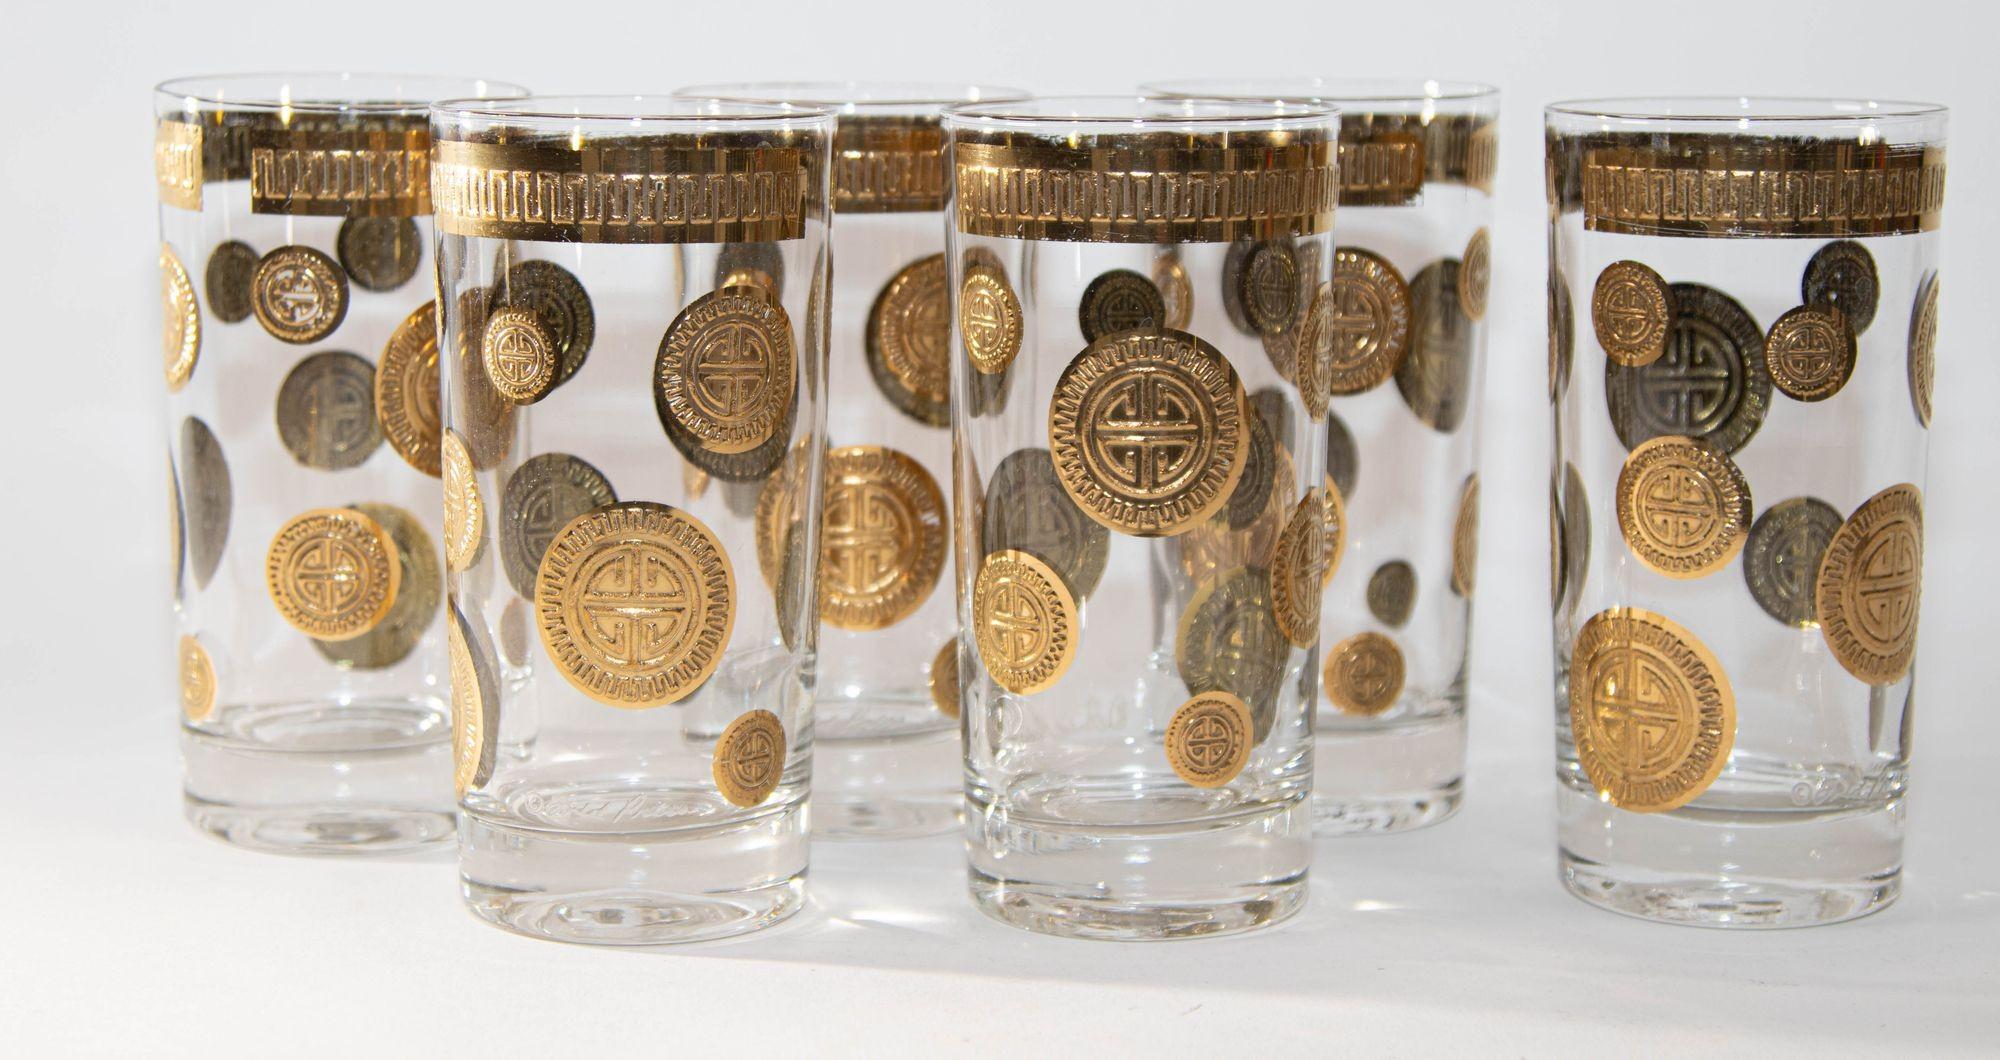 Vintage 1960s Vintage Fred Press Gold Drinking Highball Glasses.
Collectible rare Fred Press Highball Tumblers, 22K Gold, Mid-Century Gold Medallion Glasses, Set of 6.
Beautiful set of Mid-century, Gold detail design highball cocktail glasses.
Each